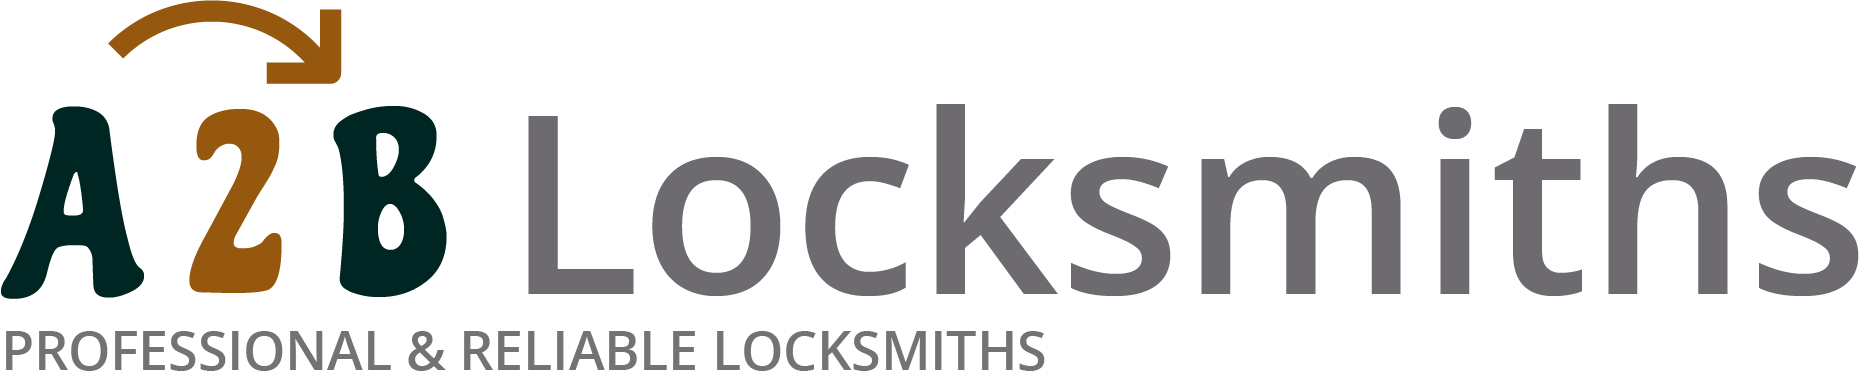 If you are locked out of house in Bury St Edmunds, our 24/7 local emergency locksmith services can help you.